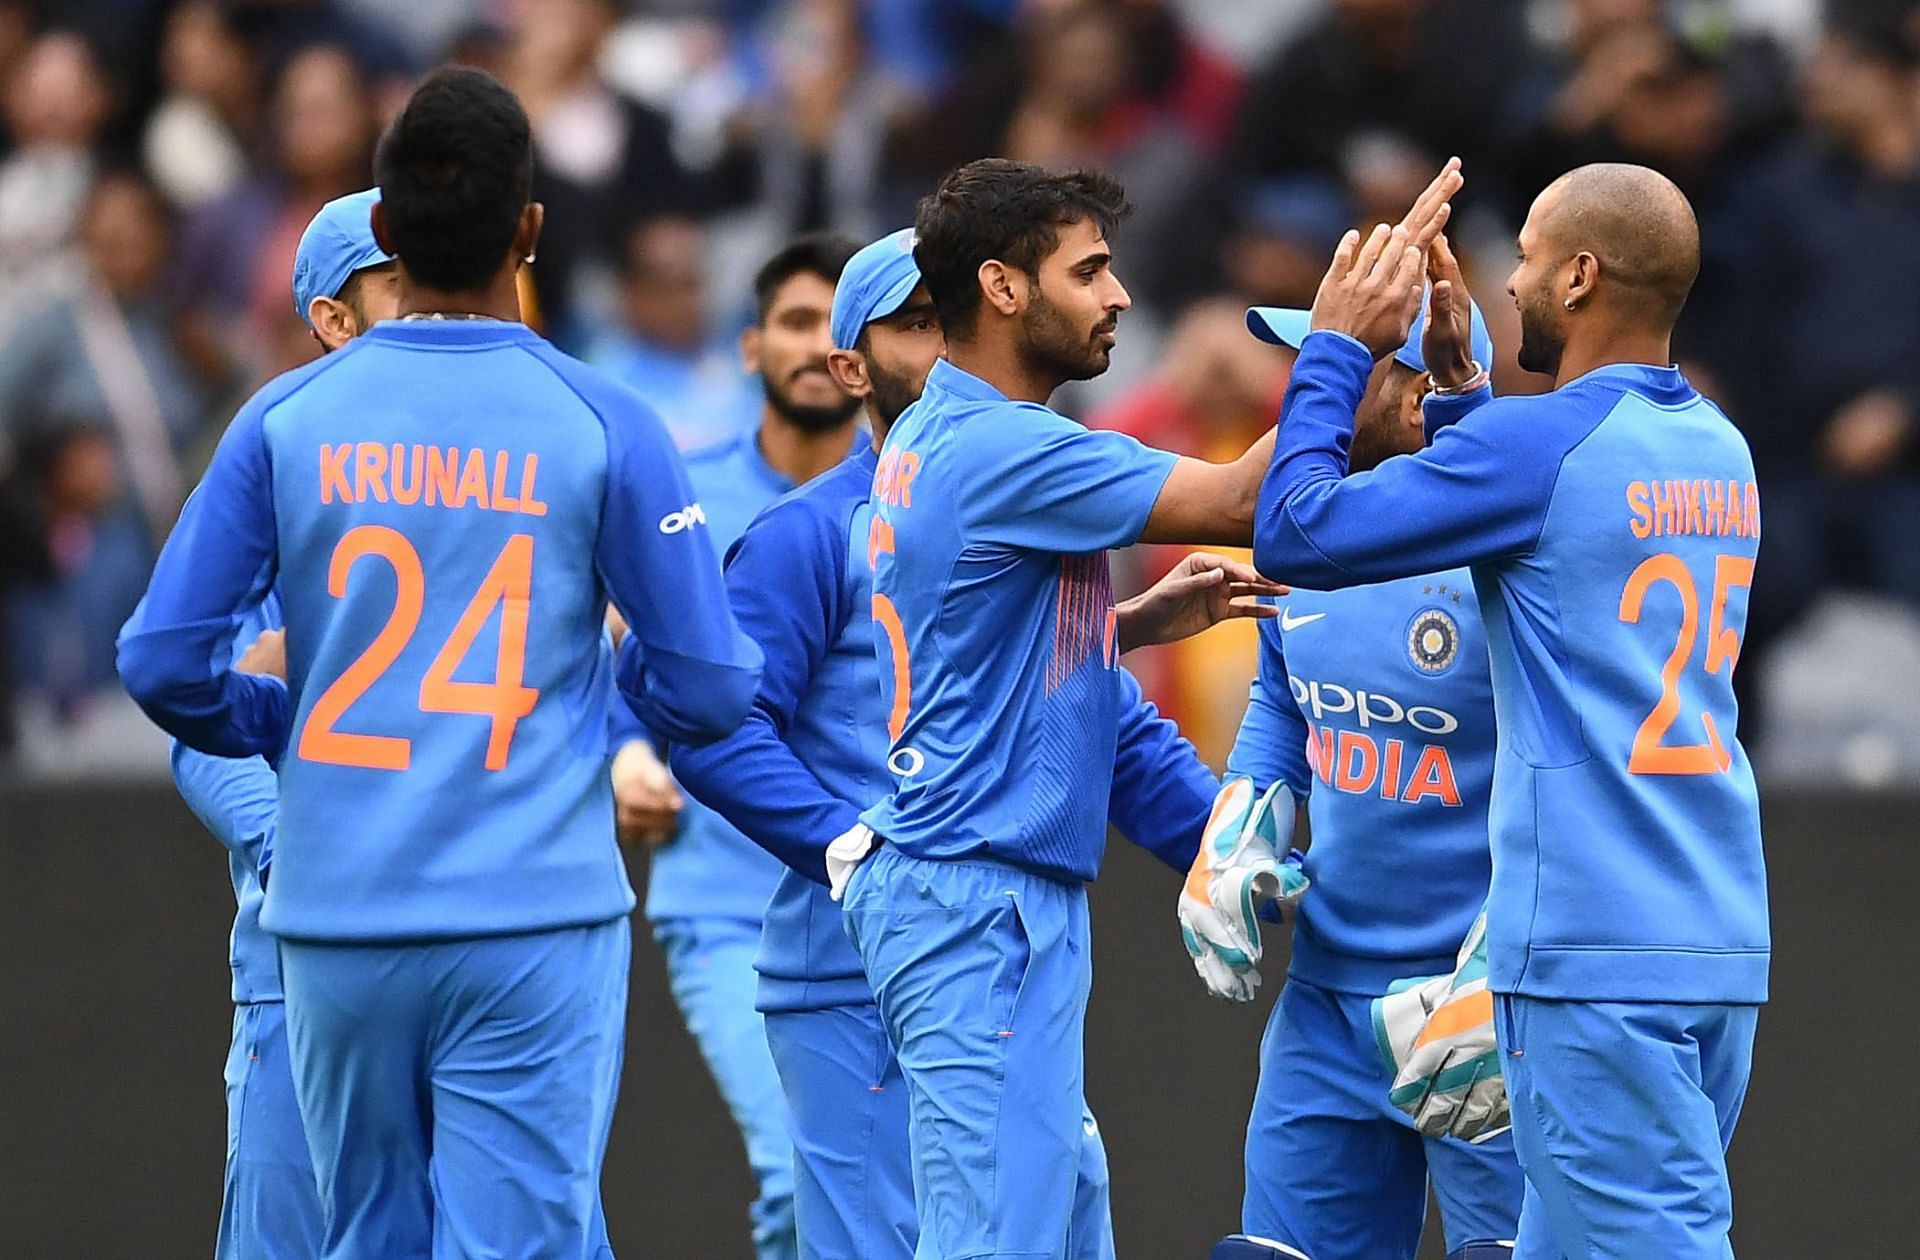 Bhuvneshwar Kumar celebrates a wicket with teammates. Pic: Getty Images